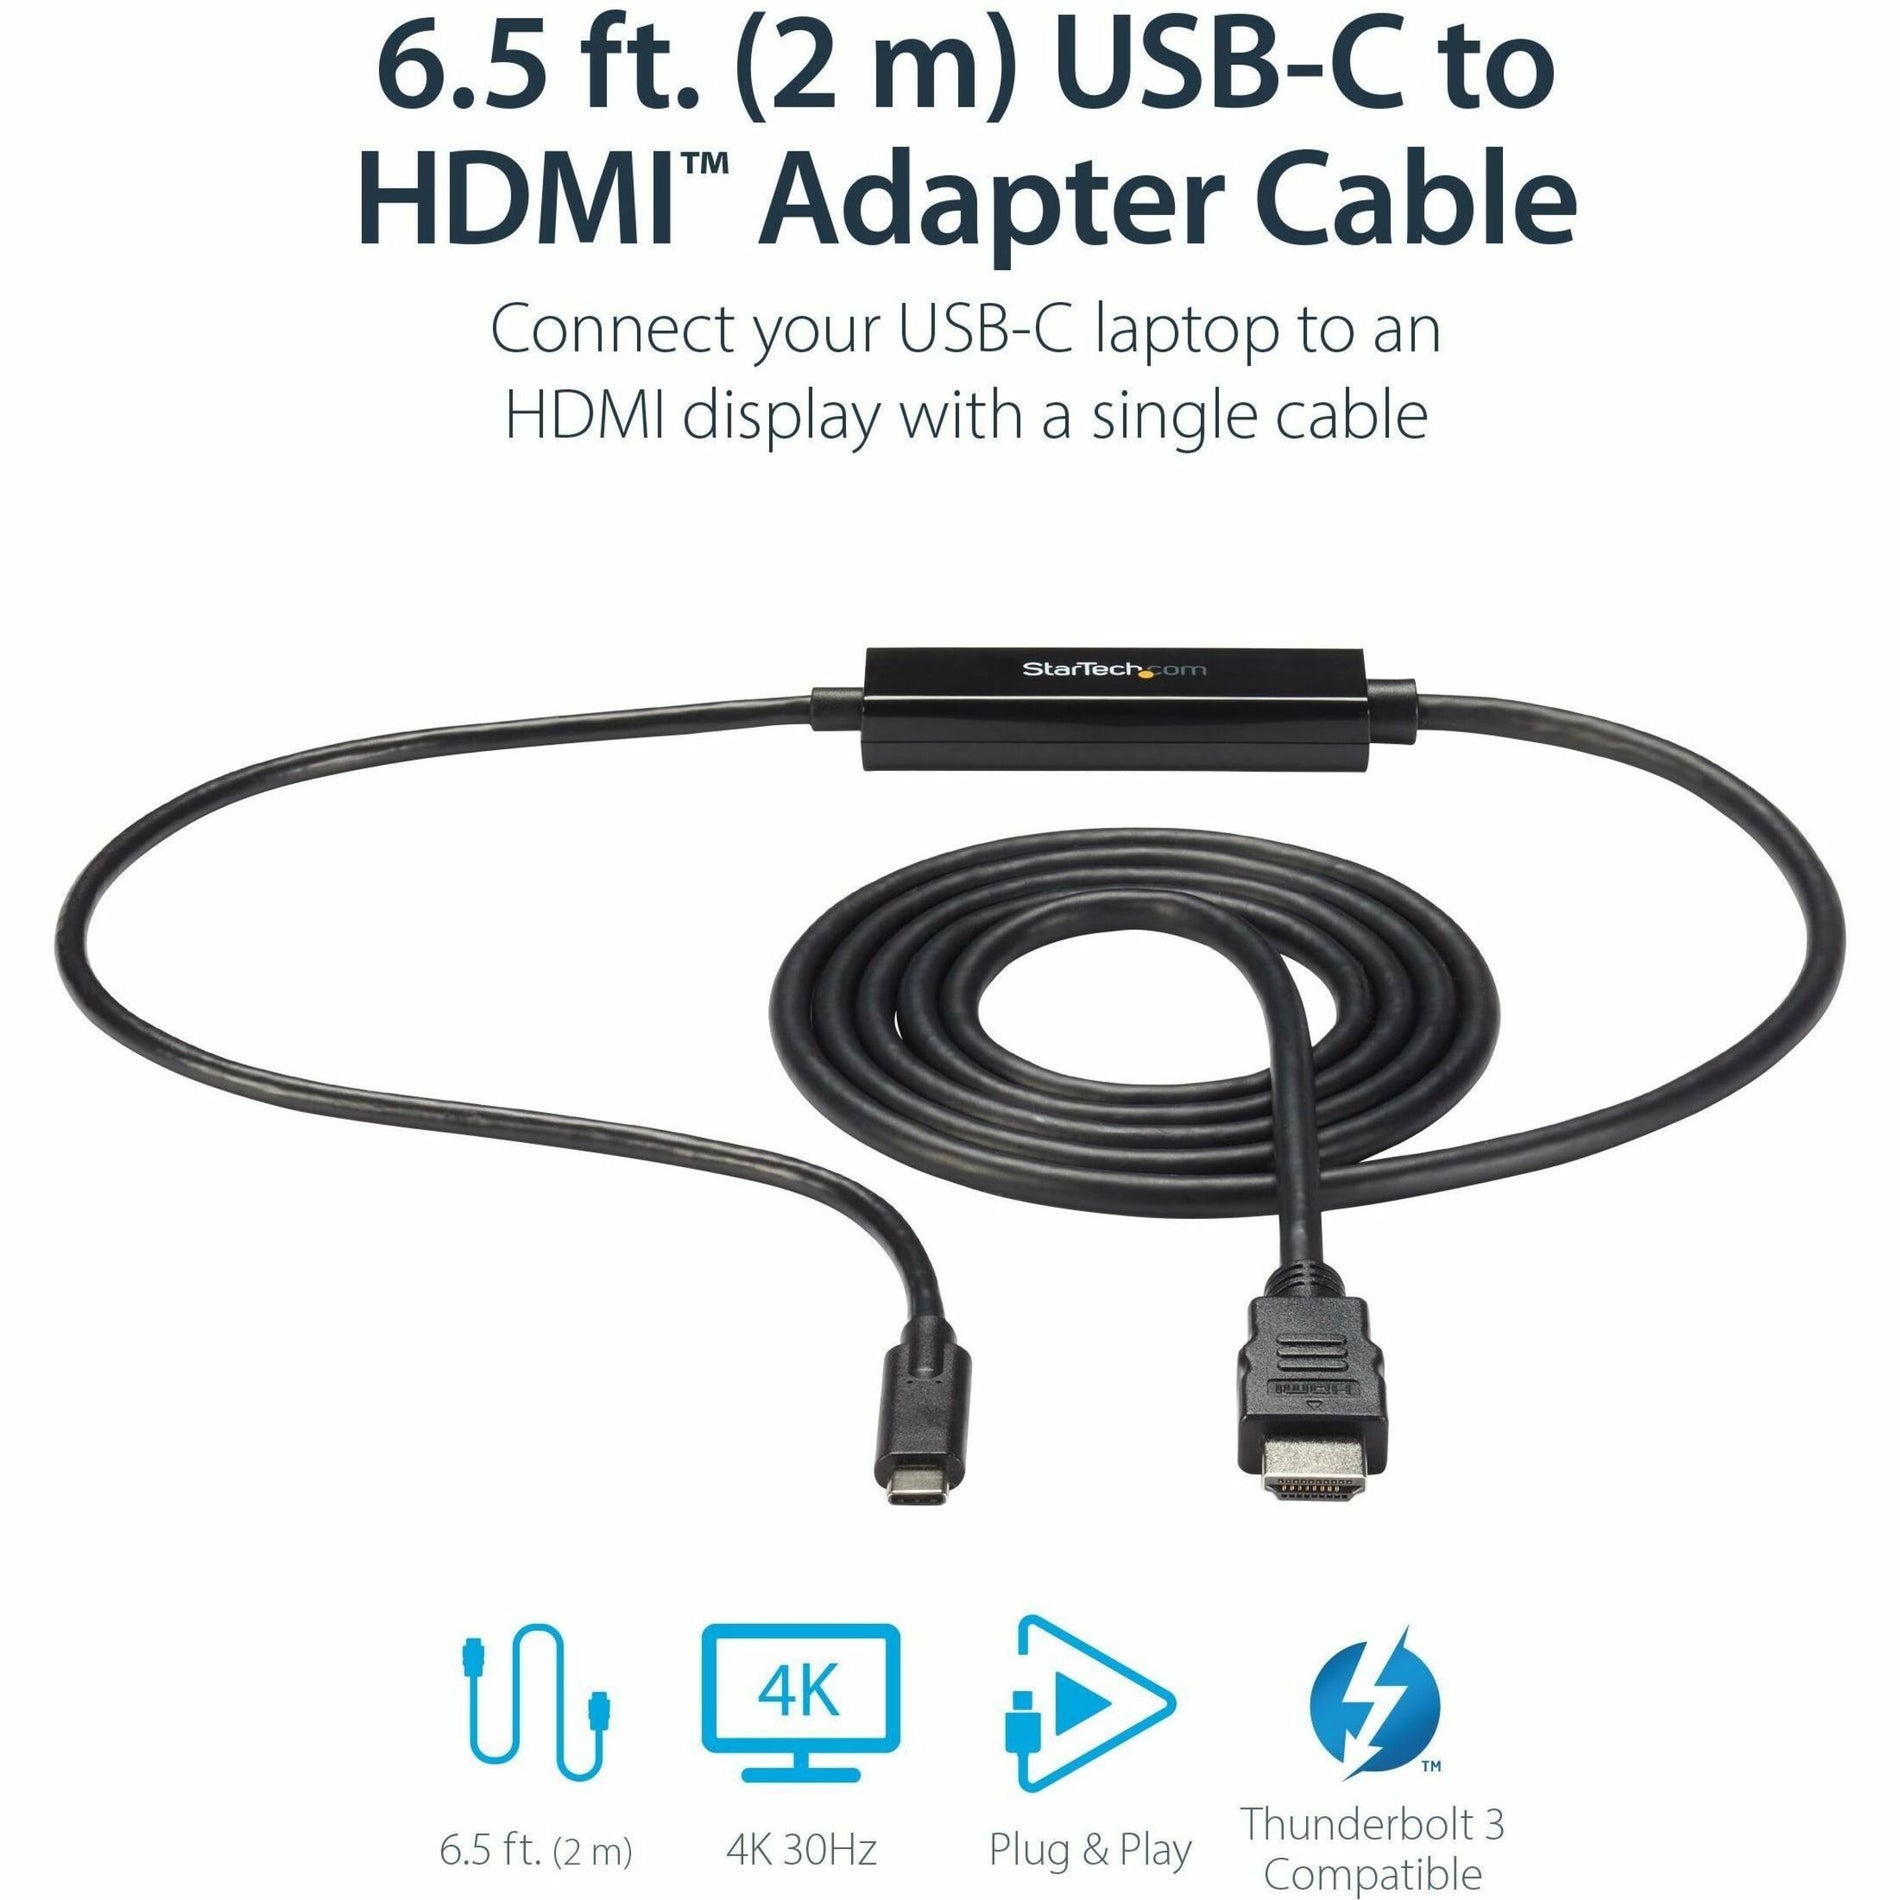 StarTech.com CDP2HDMM2MB USB-C to HDMI Adapter Cable - 2m (6 ft.) - 4K at 30 Hz, Plug & Play, Reversible